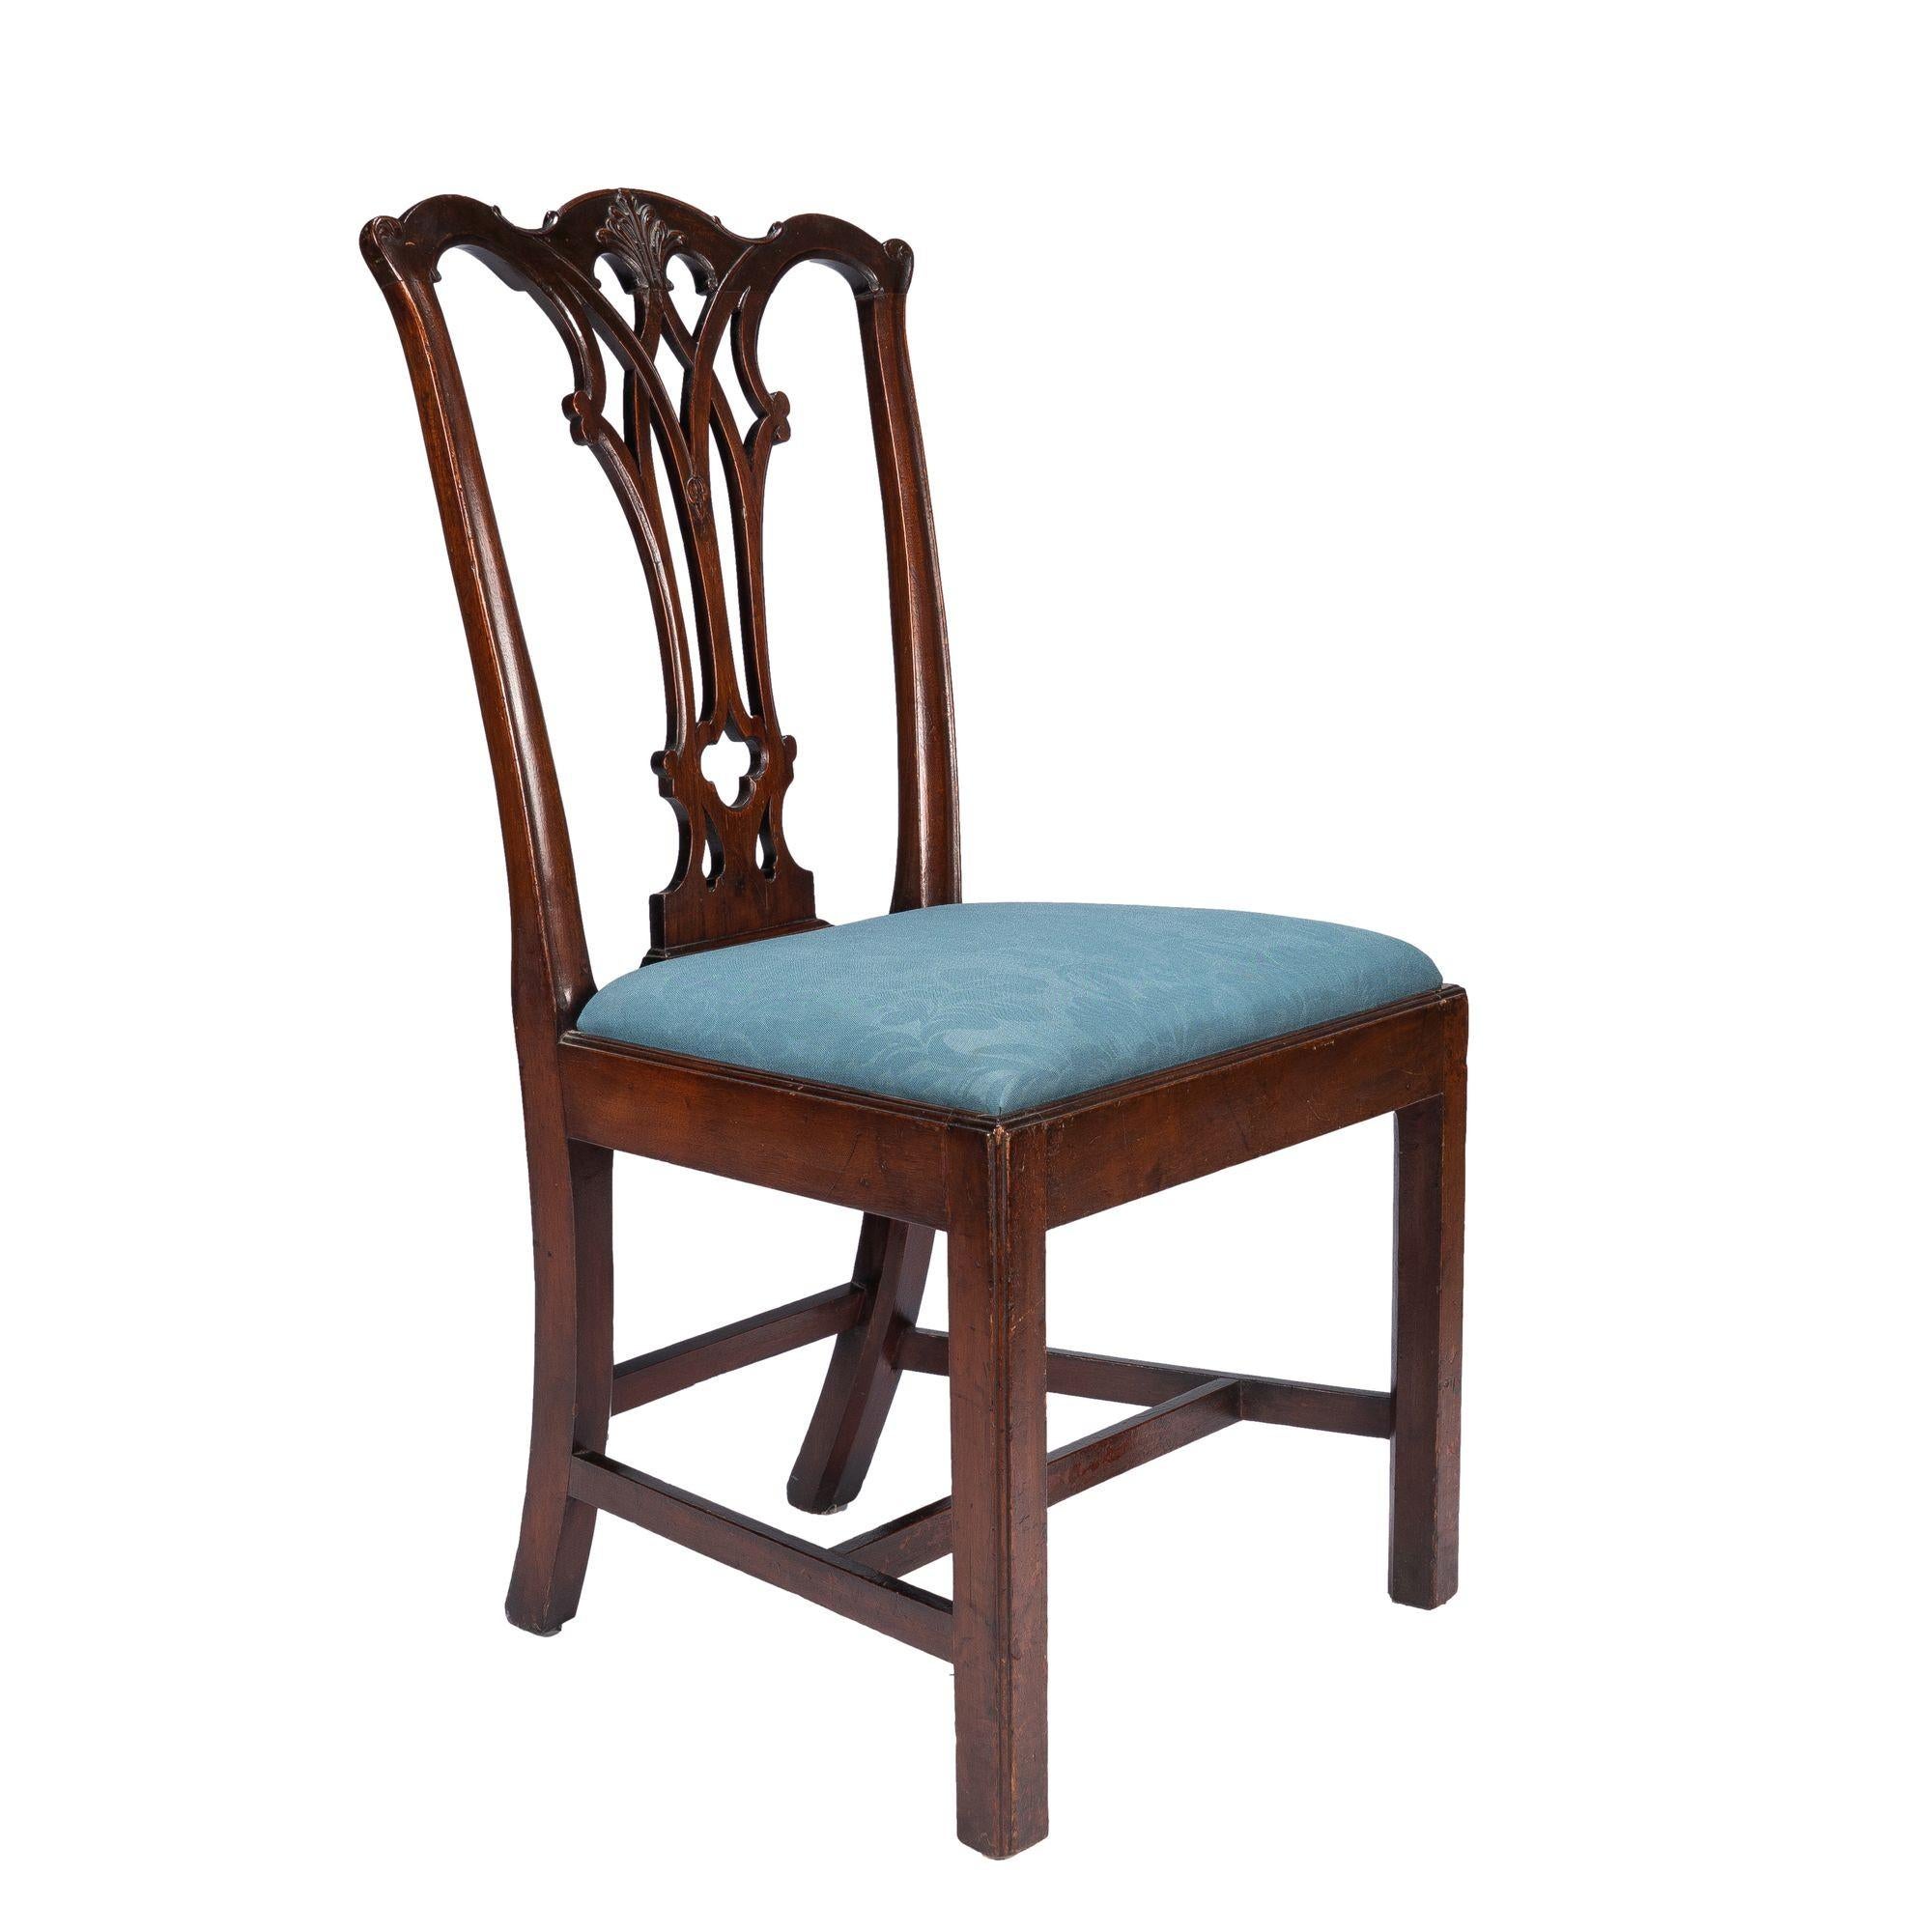 Philadelphia Chippendale Mahogany Slip Seat Side Chair by Thomas Tuft, 1770 For Sale 2